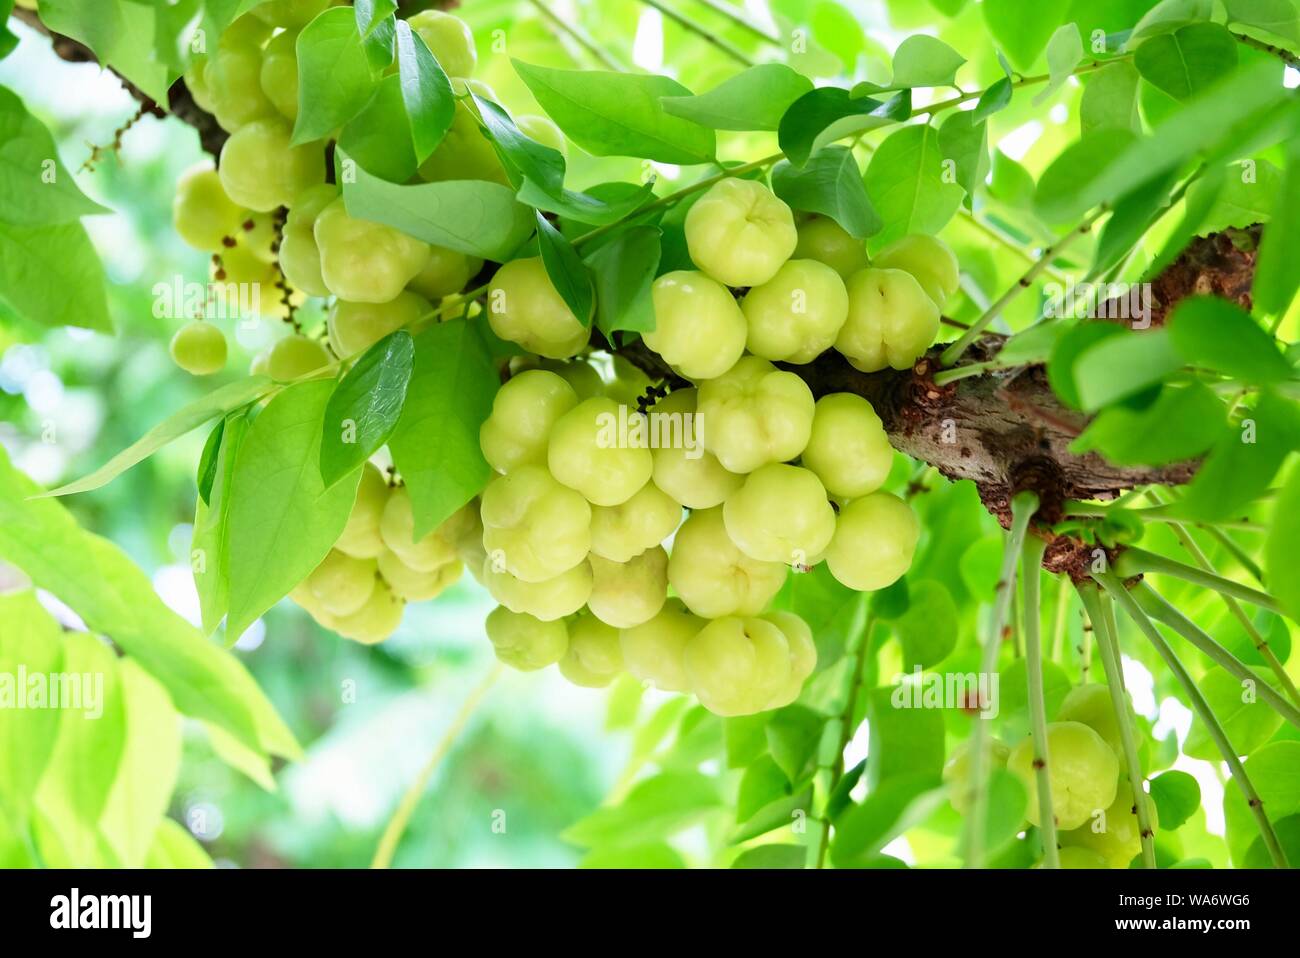 Bunch of Fresh Star Gooseberries With Stem and Green Leaves Hanging on Tree Branch. Stock Photo